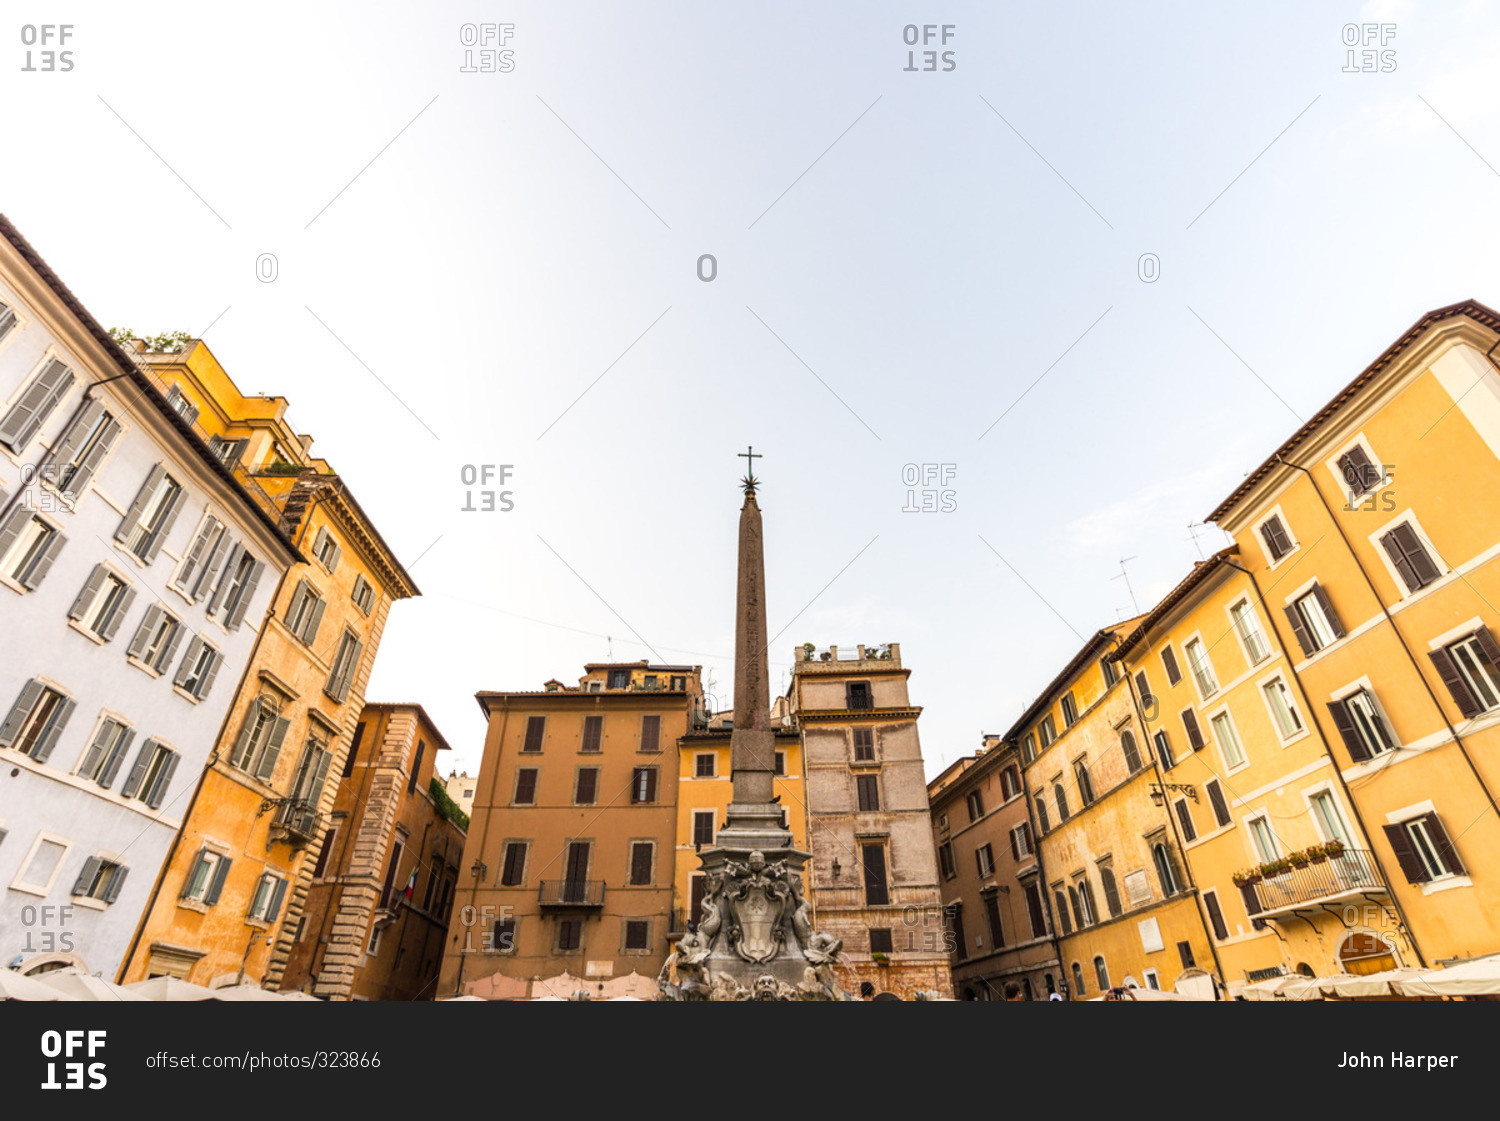 A fountain and buildings in Rome